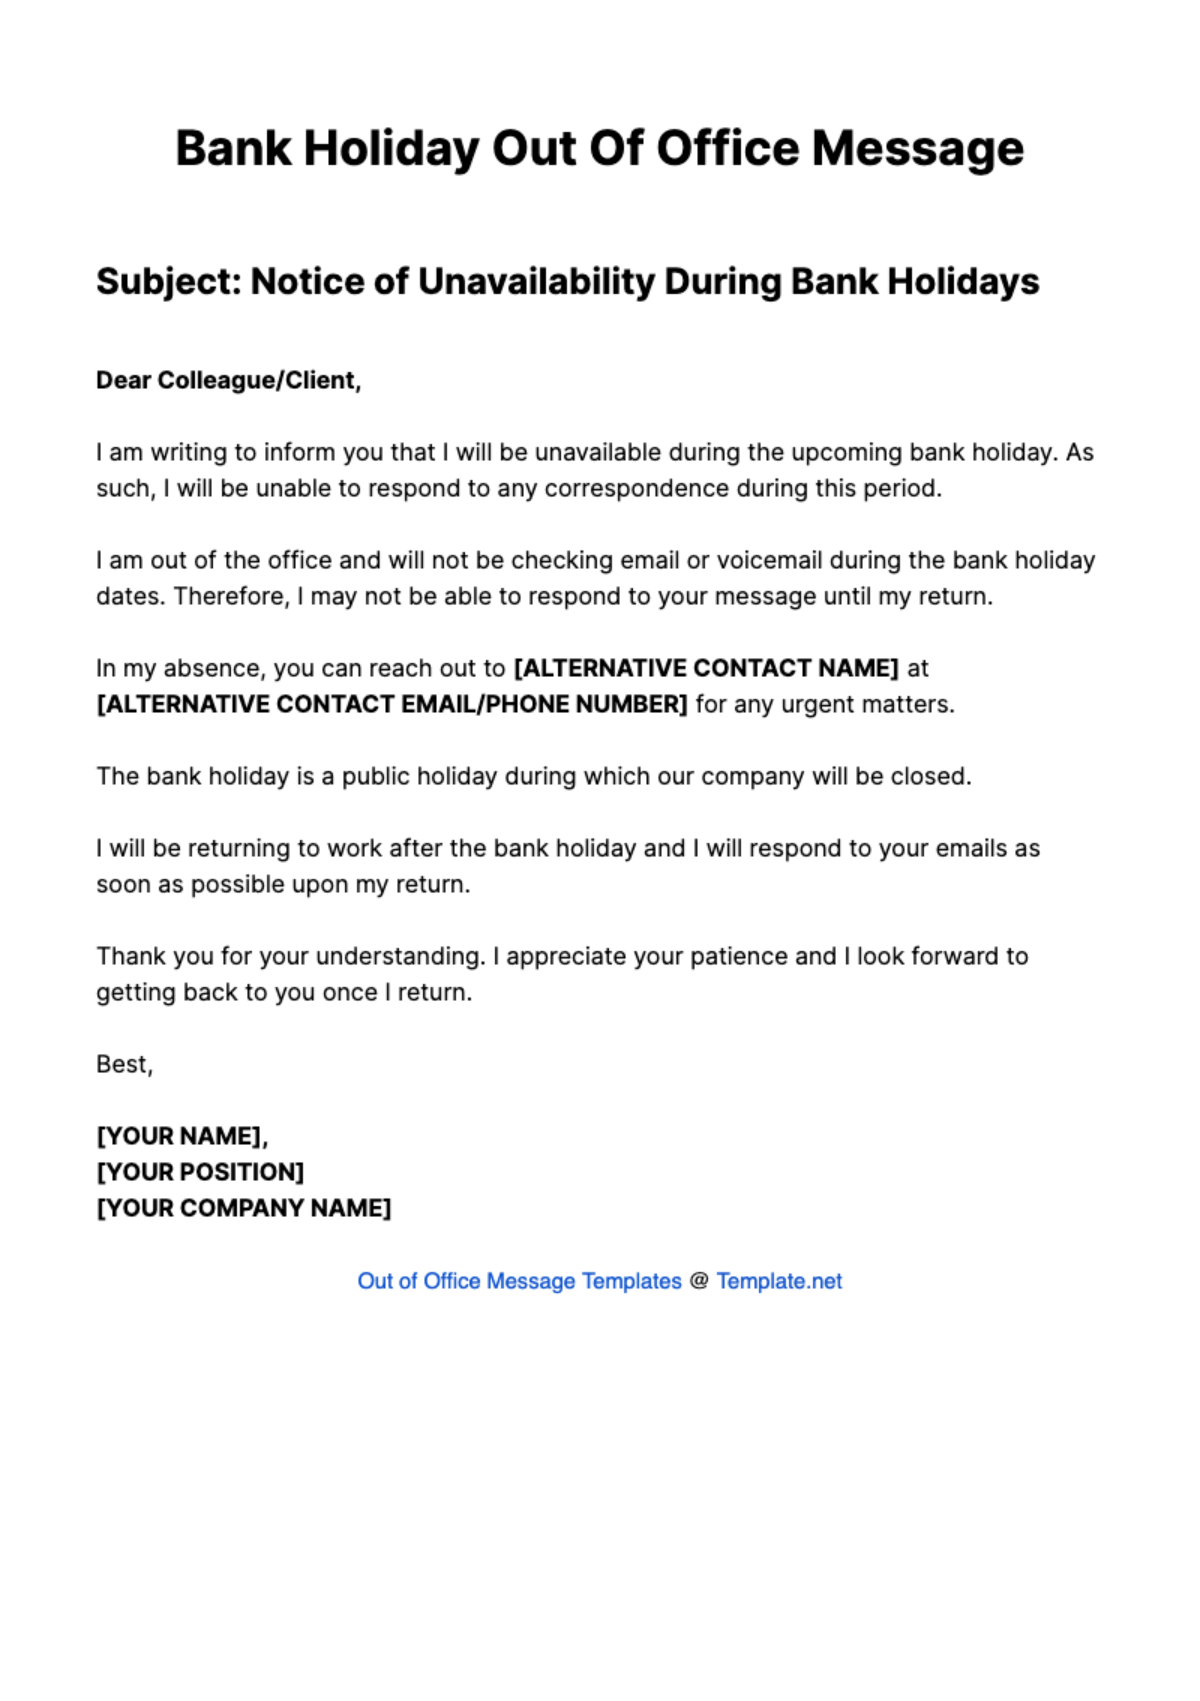 Bank Holiday Out Of Office Message Template